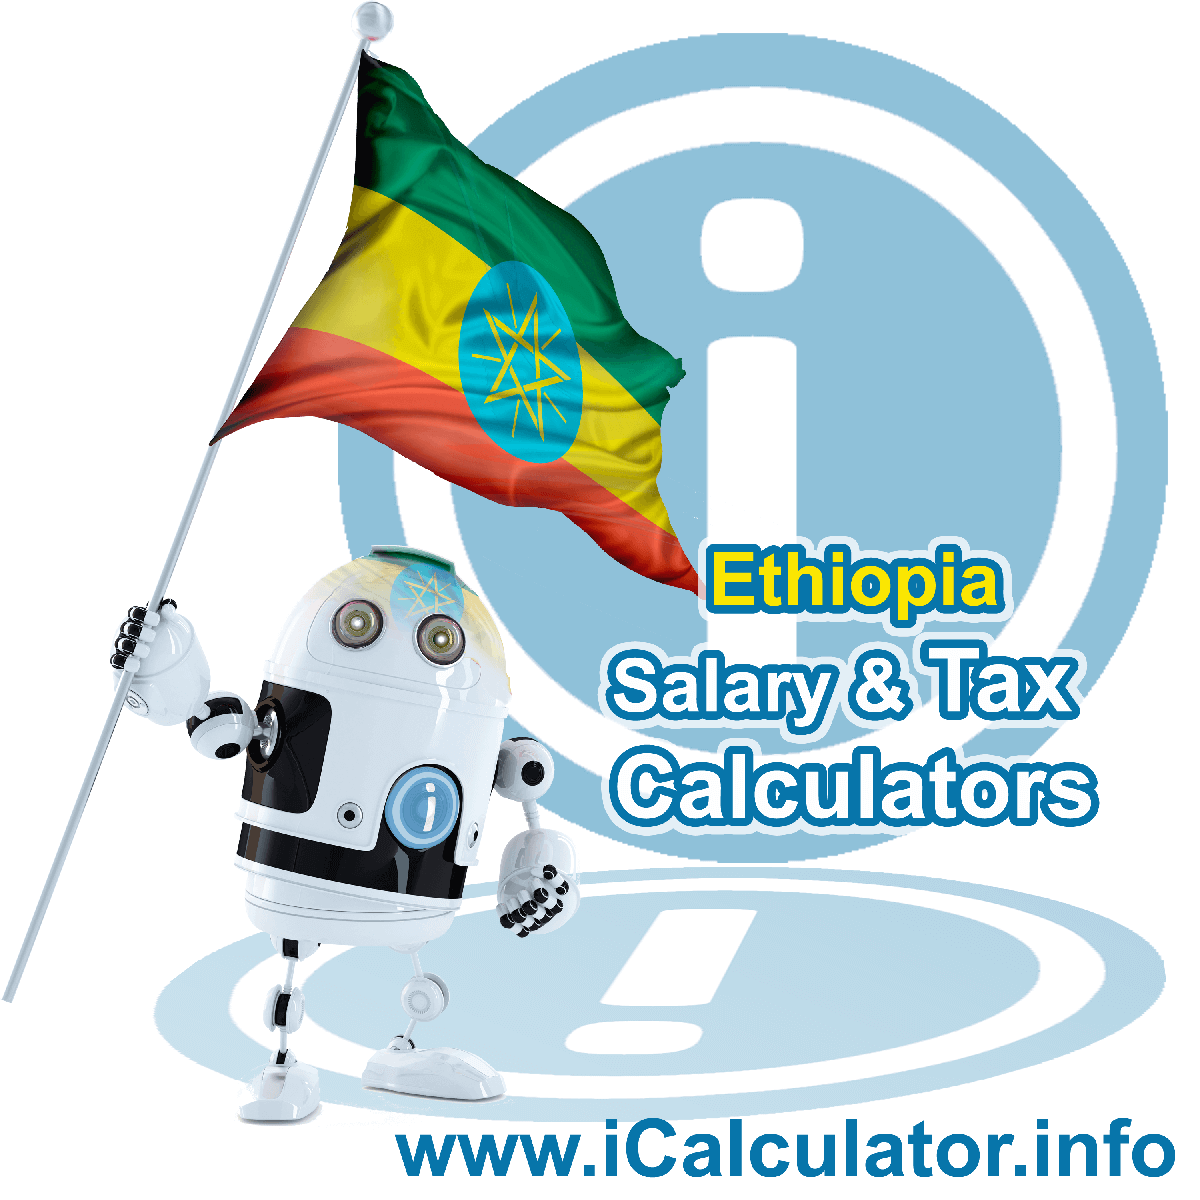 Ethiopia Wage Calculator. This image shows the Ethiopia flag and information relating to the tax formula for the Ethiopia Tax Calculator